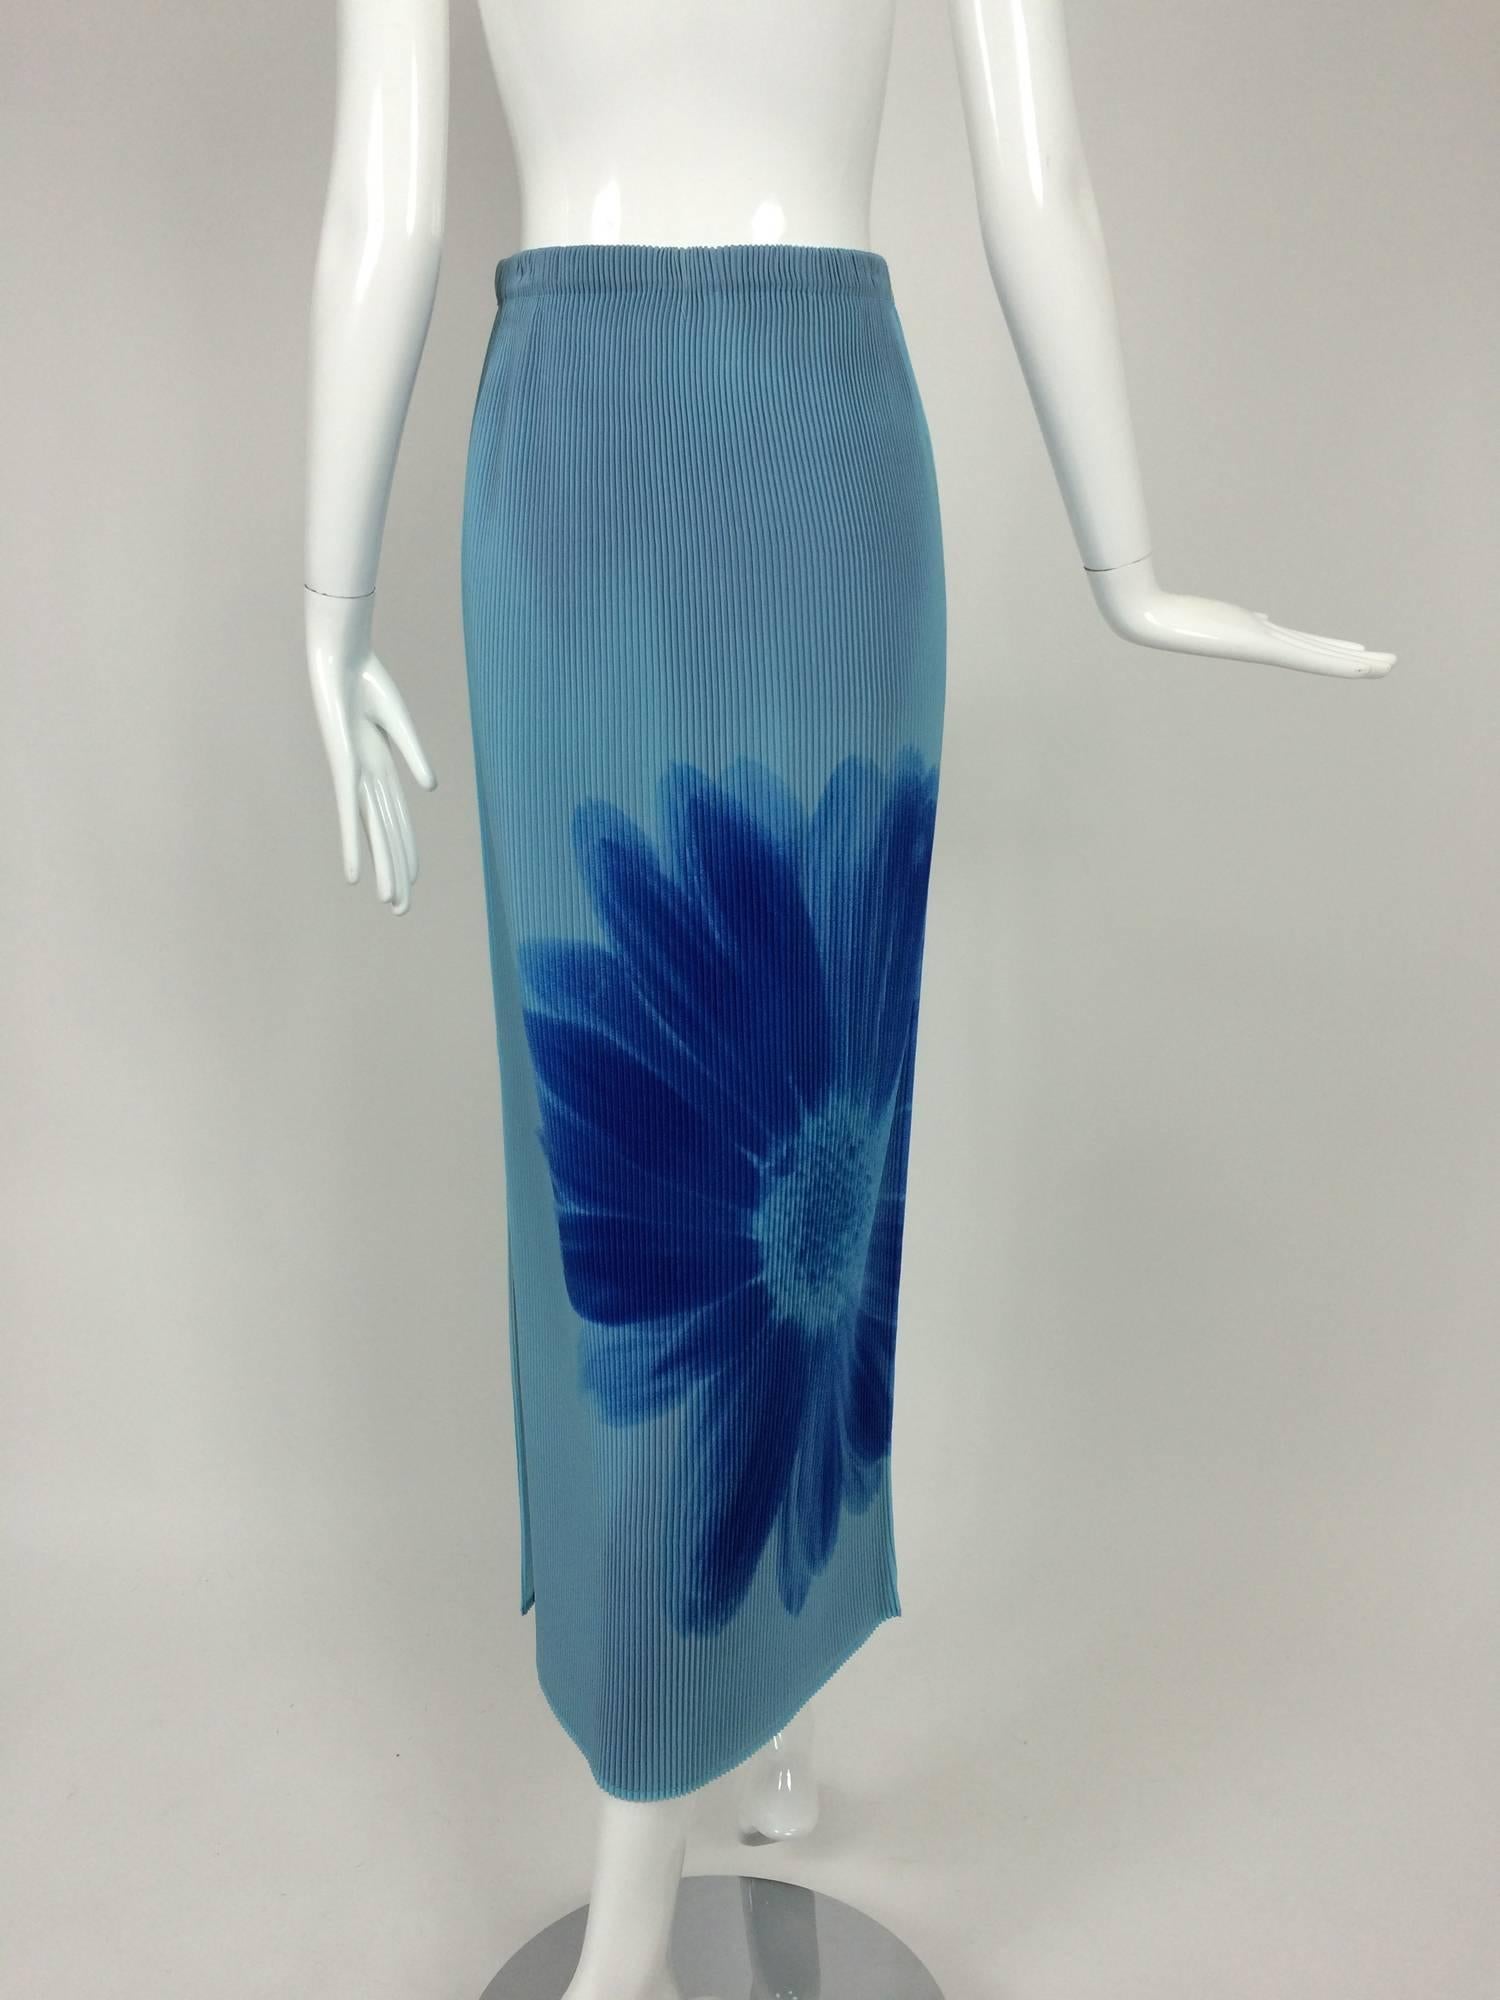 Issey Miyake layered blue pleated maxi skirt with daises...Pull on maxi skirt with narrow accordion pleating, the top layer a dusty sky blue, there is a large printed daisy at the front and back...Deep side vent...The pleated under skirt is royal